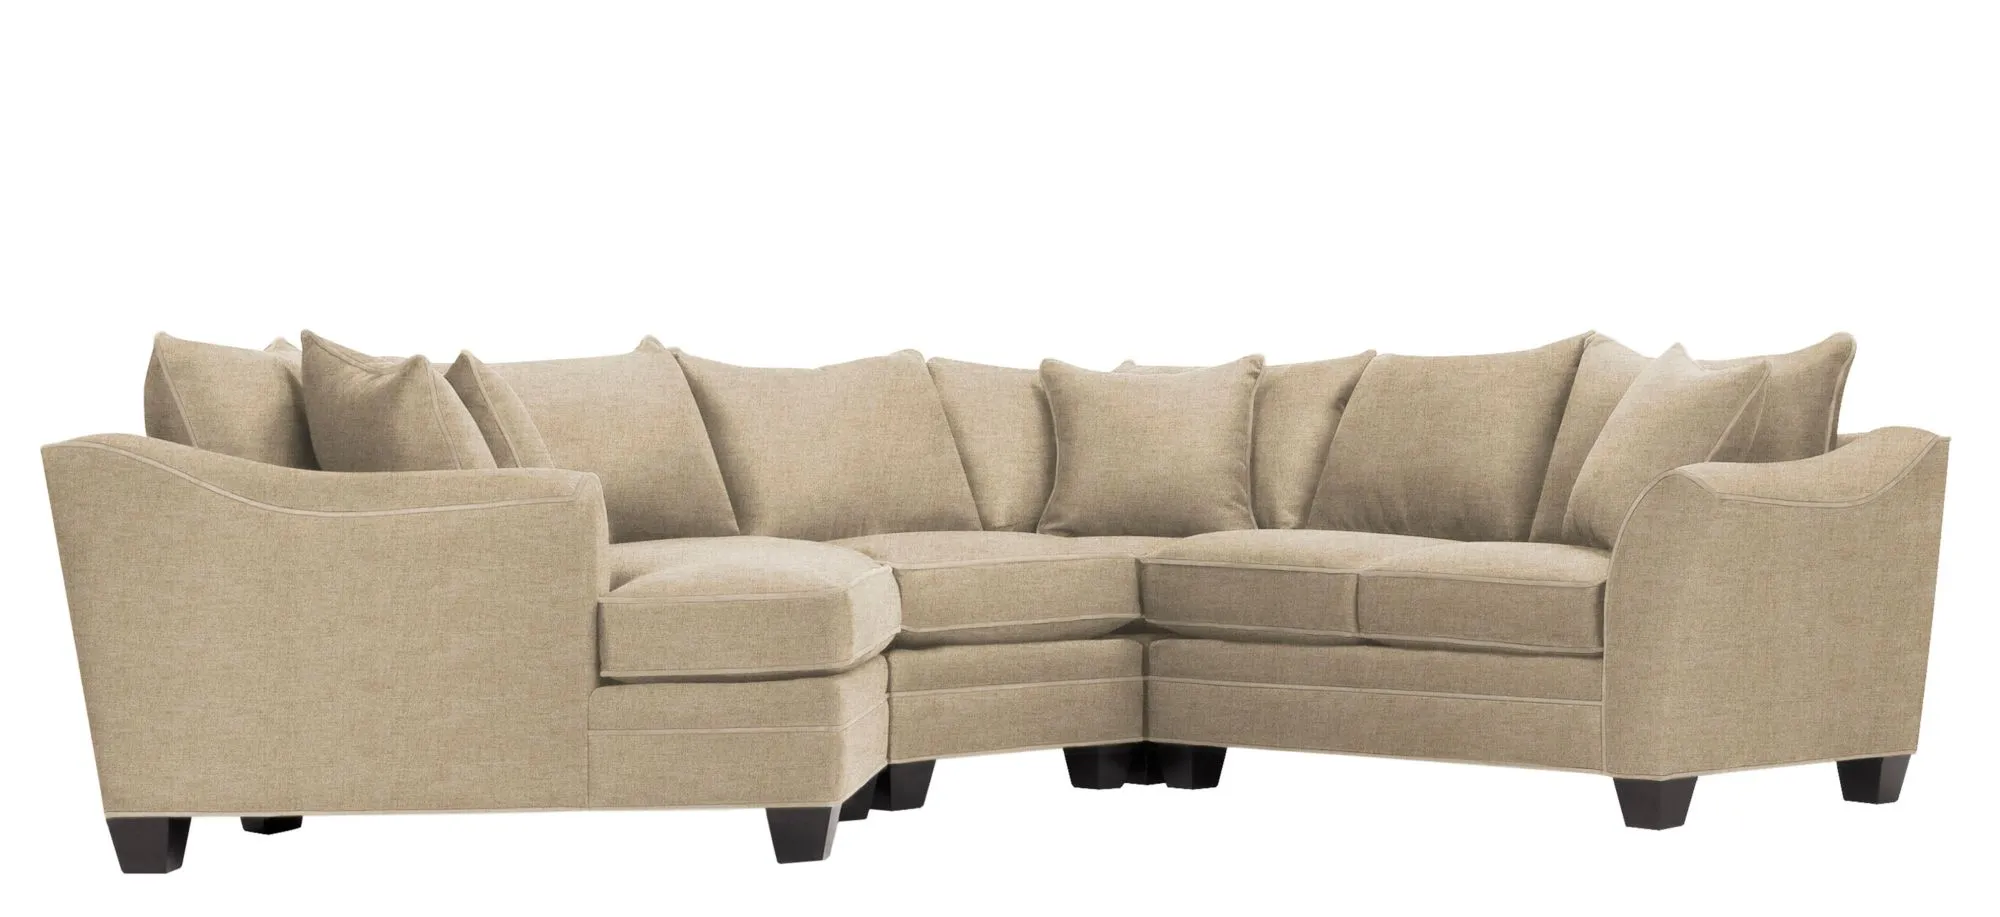 Foresthill 4-pc. Left Hand Cuddler Sectional Sofa in Santa Rosa Linen by H.M. Richards